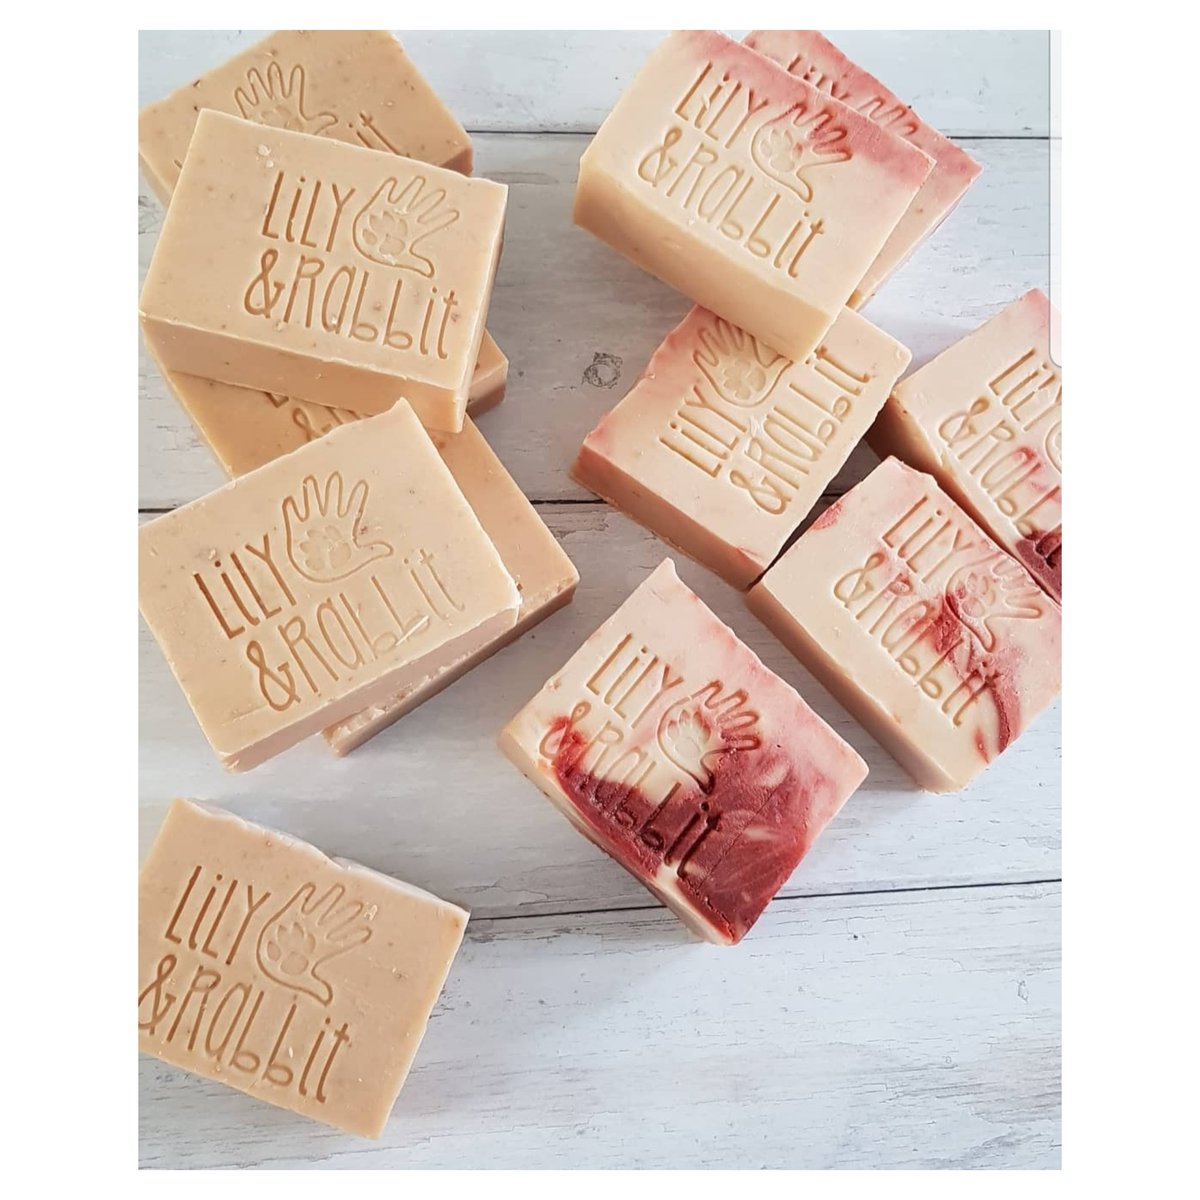 Forget to switch off your alarm for this morning? 🤦‍♀️

Starting the week off with some Geranium Rose & our Naked bar for baby &those who want to go unscented.

Plenty available online and @realfoodmarkets this coming Sunday.

#soap #soapmaker #handmadeuk #northyorksire